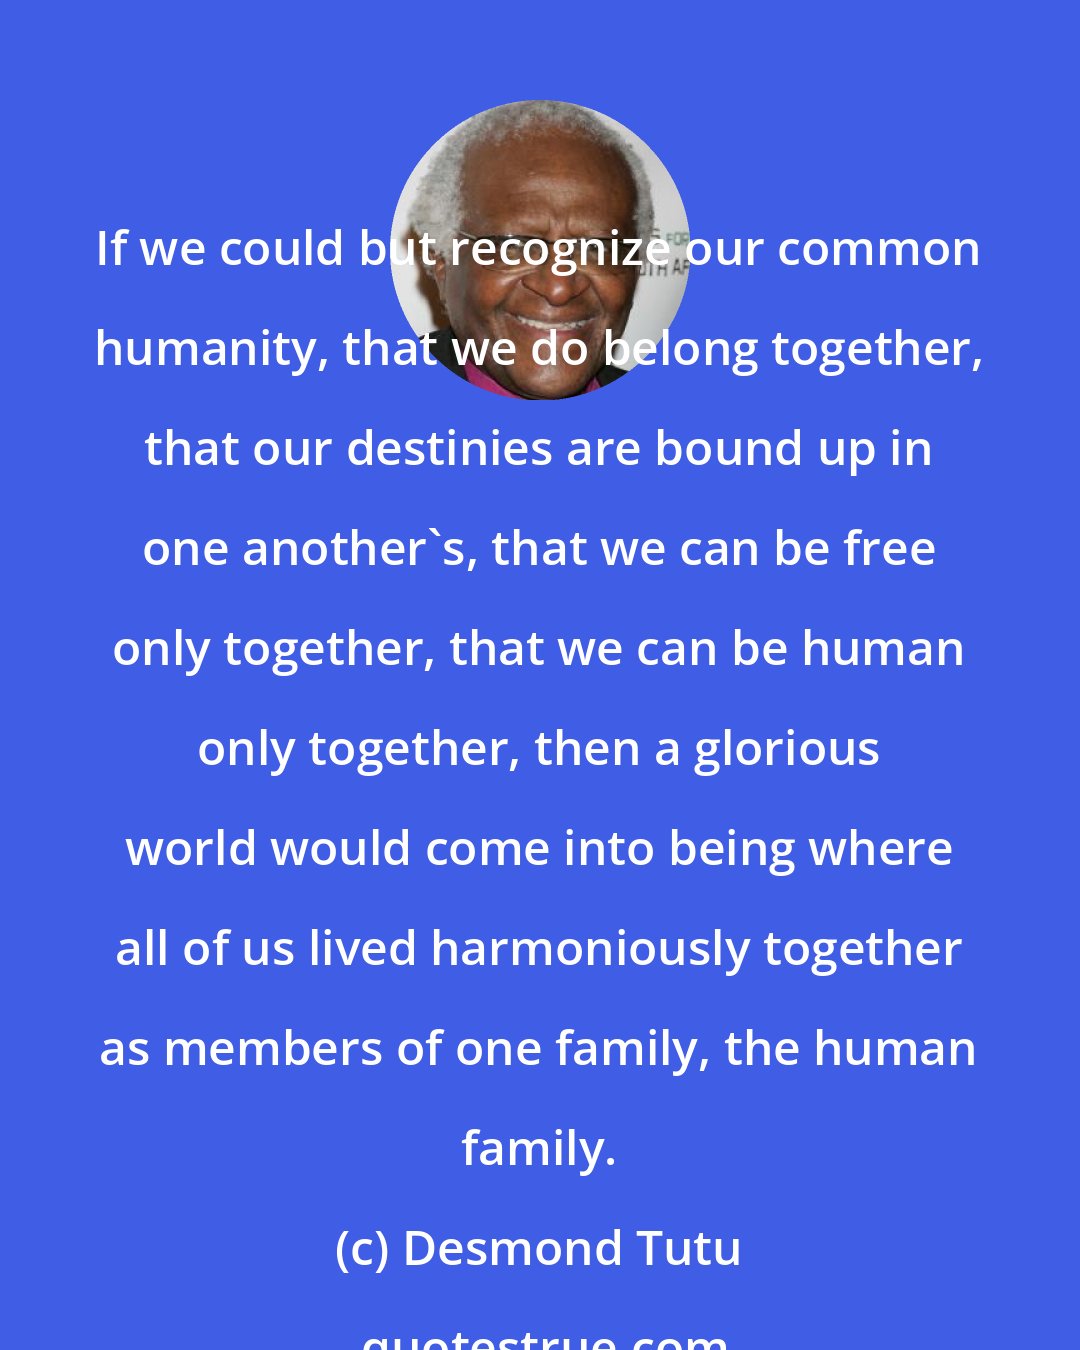 Desmond Tutu: If we could but recognize our common humanity, that we do belong together, that our destinies are bound up in one another's, that we can be free only together, that we can be human only together, then a glorious world would come into being where all of us lived harmoniously together as members of one family, the human family.